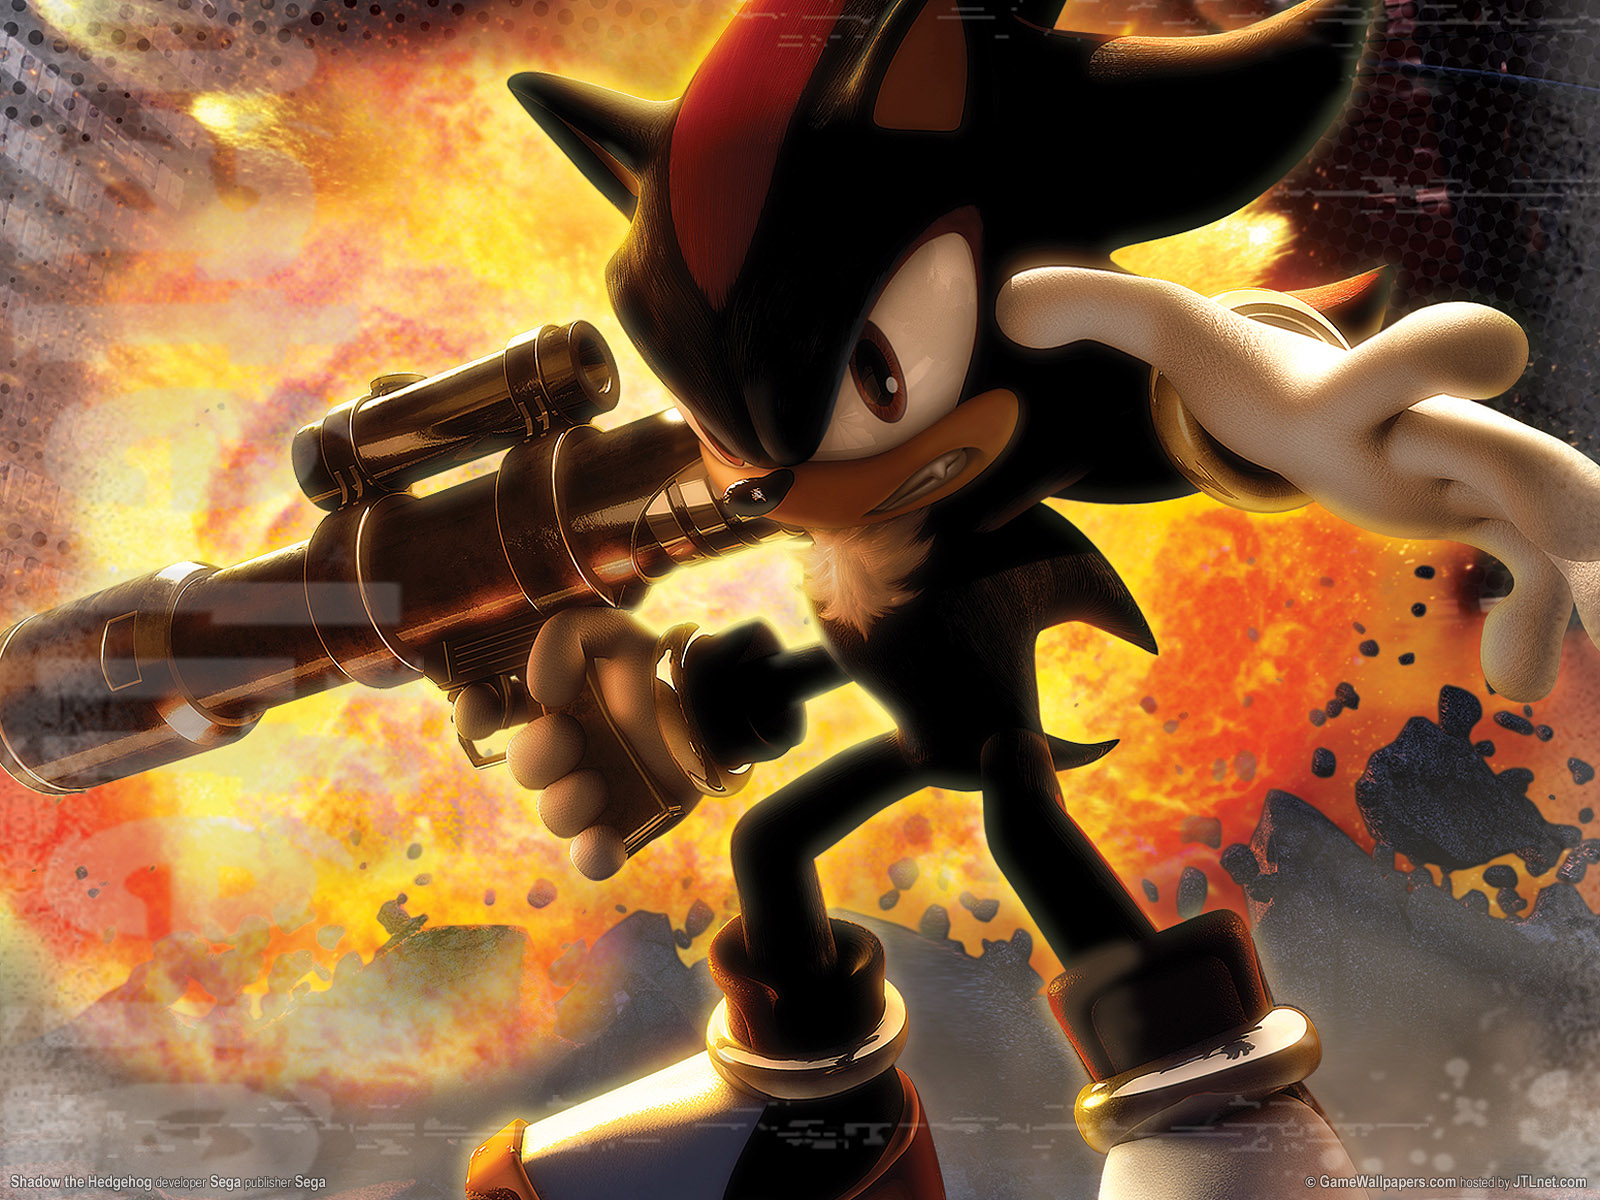 Download full size Shadow the Hedgehog wallpaper / Games / 1600x1200